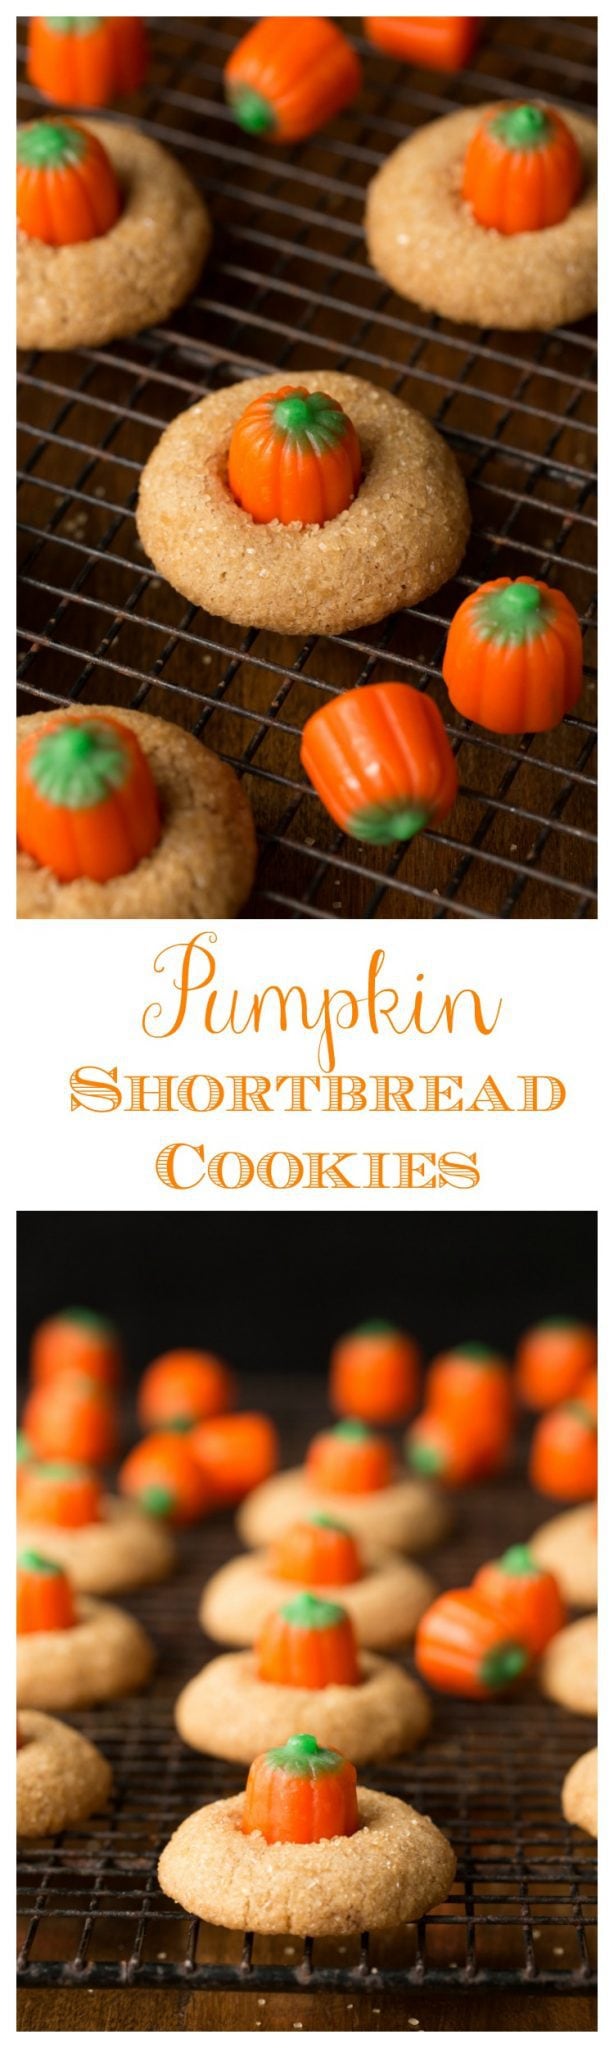 Pumpkin Shortbread Cookies - Pumpkin Shortbread Cookies - delightful fall treats that are melt in your mouth delicious - a win win, for sure!